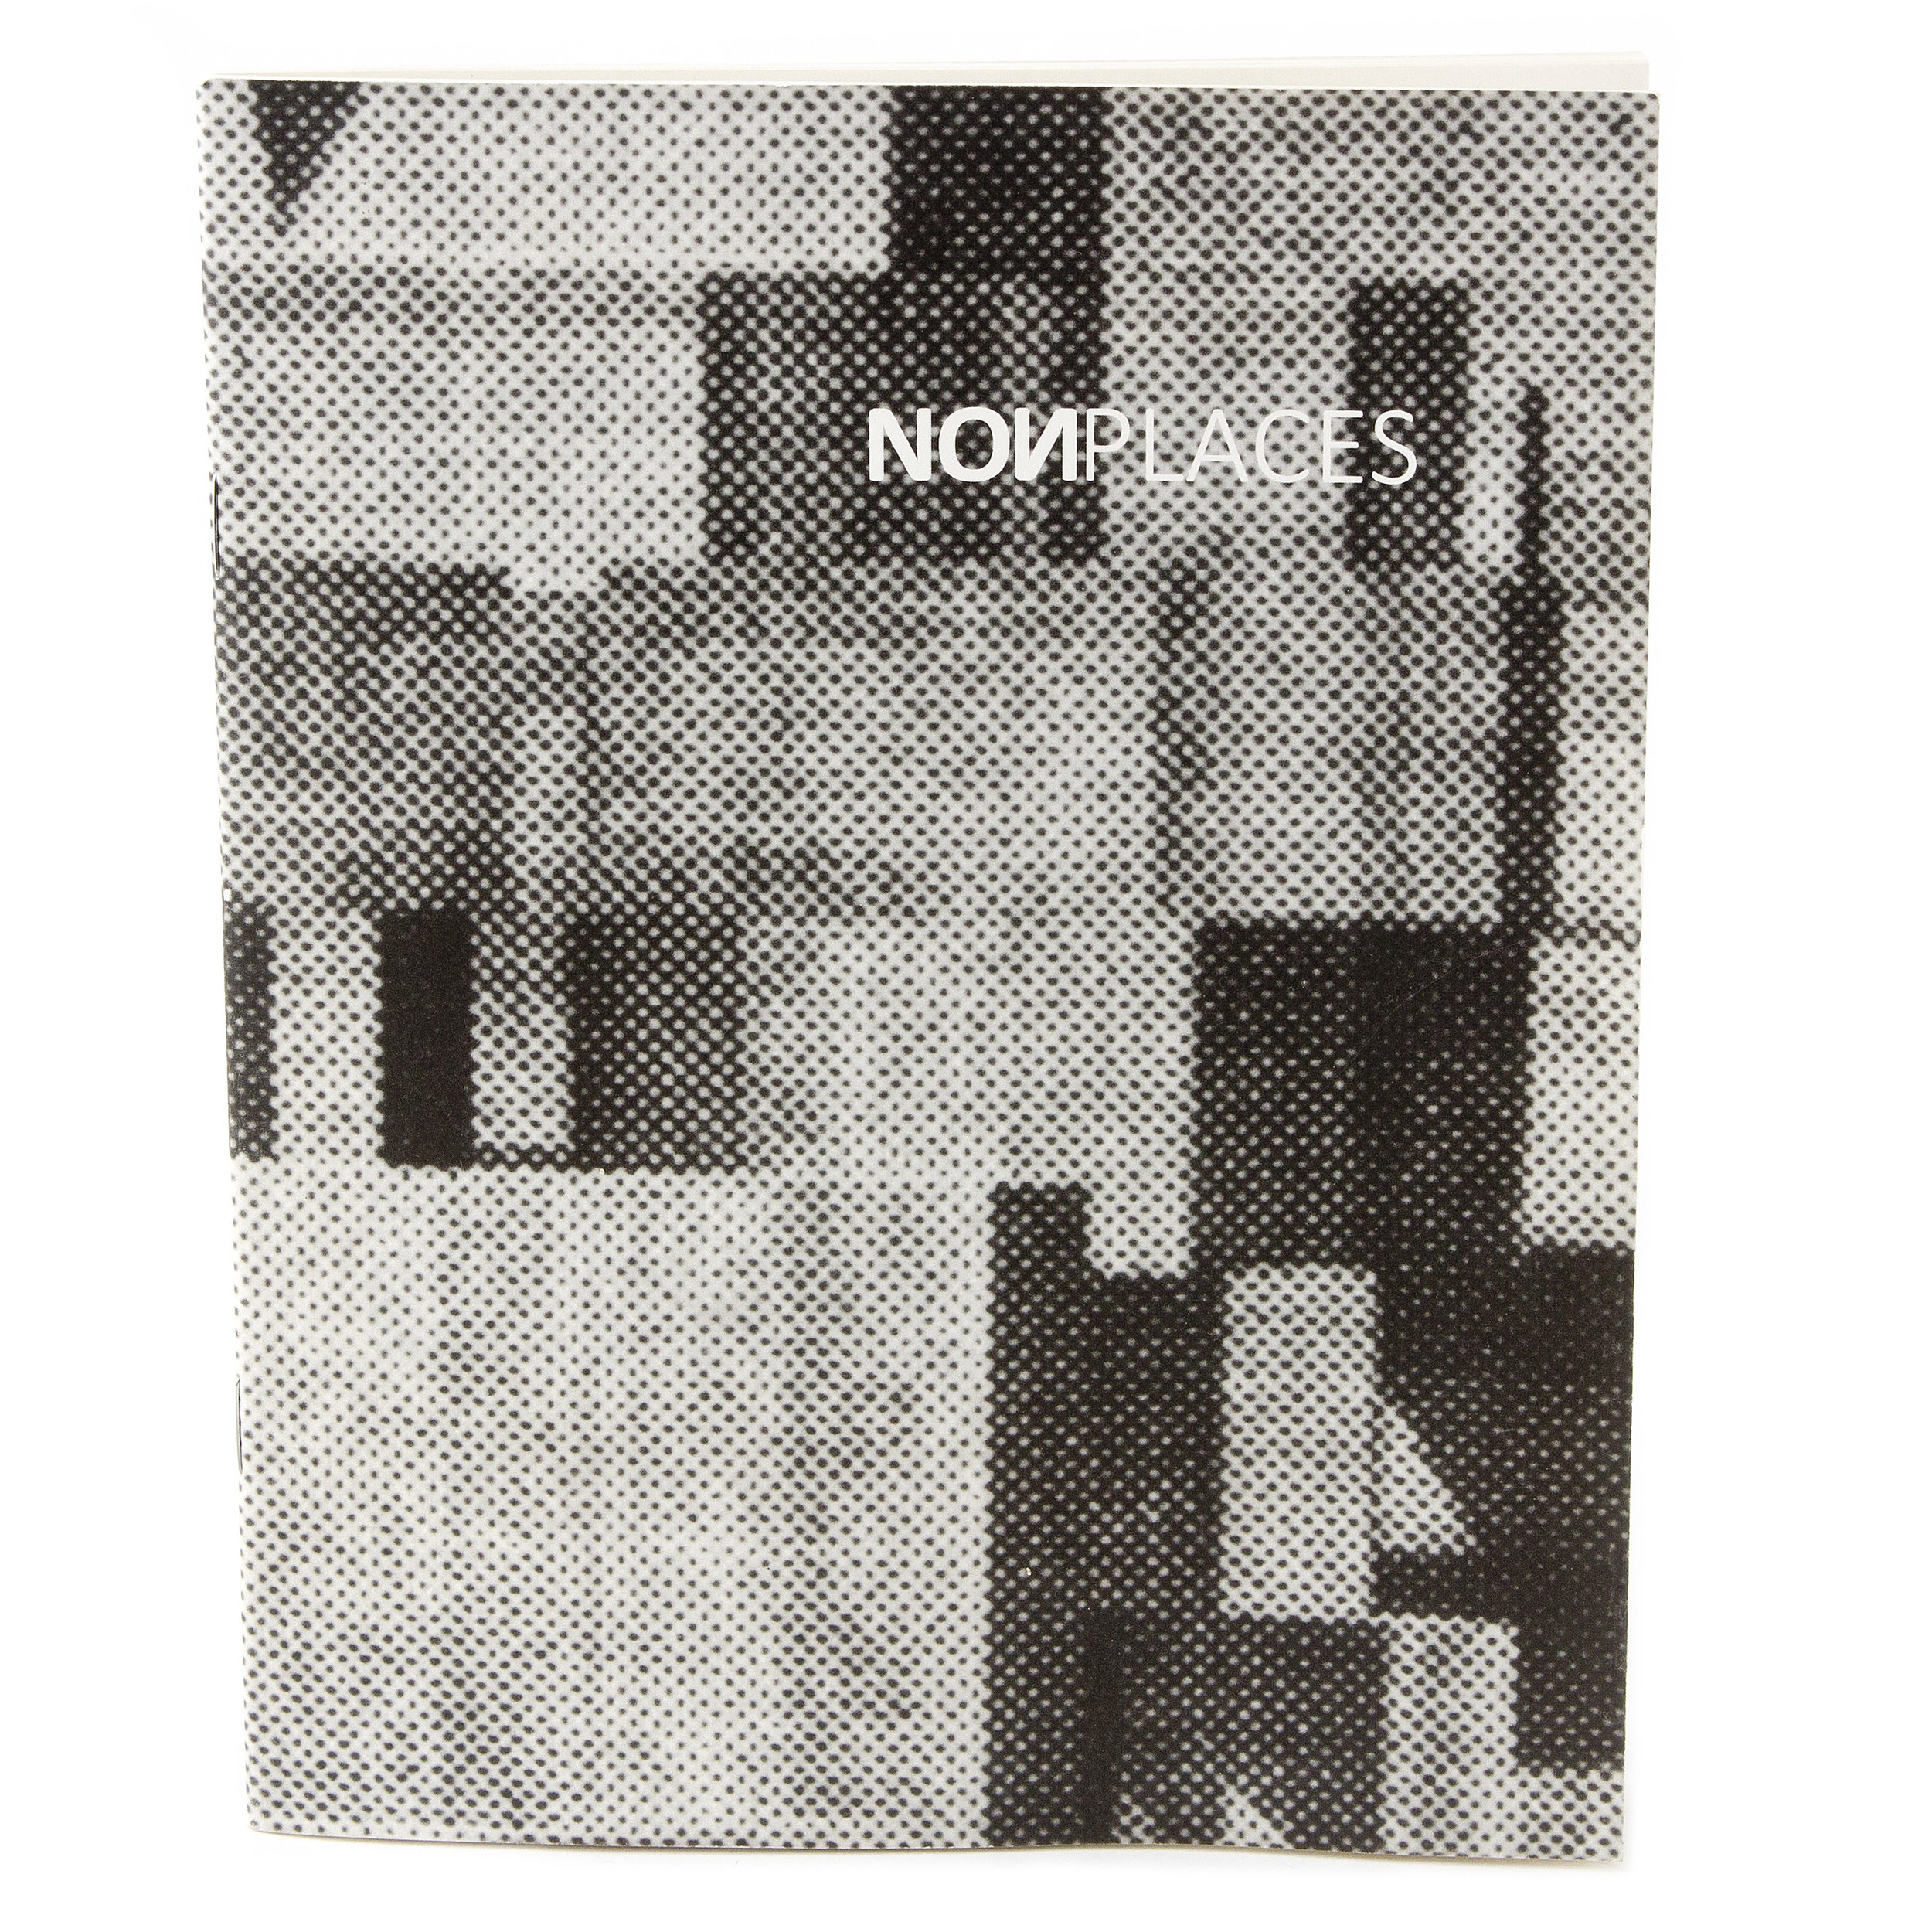 NonPlace